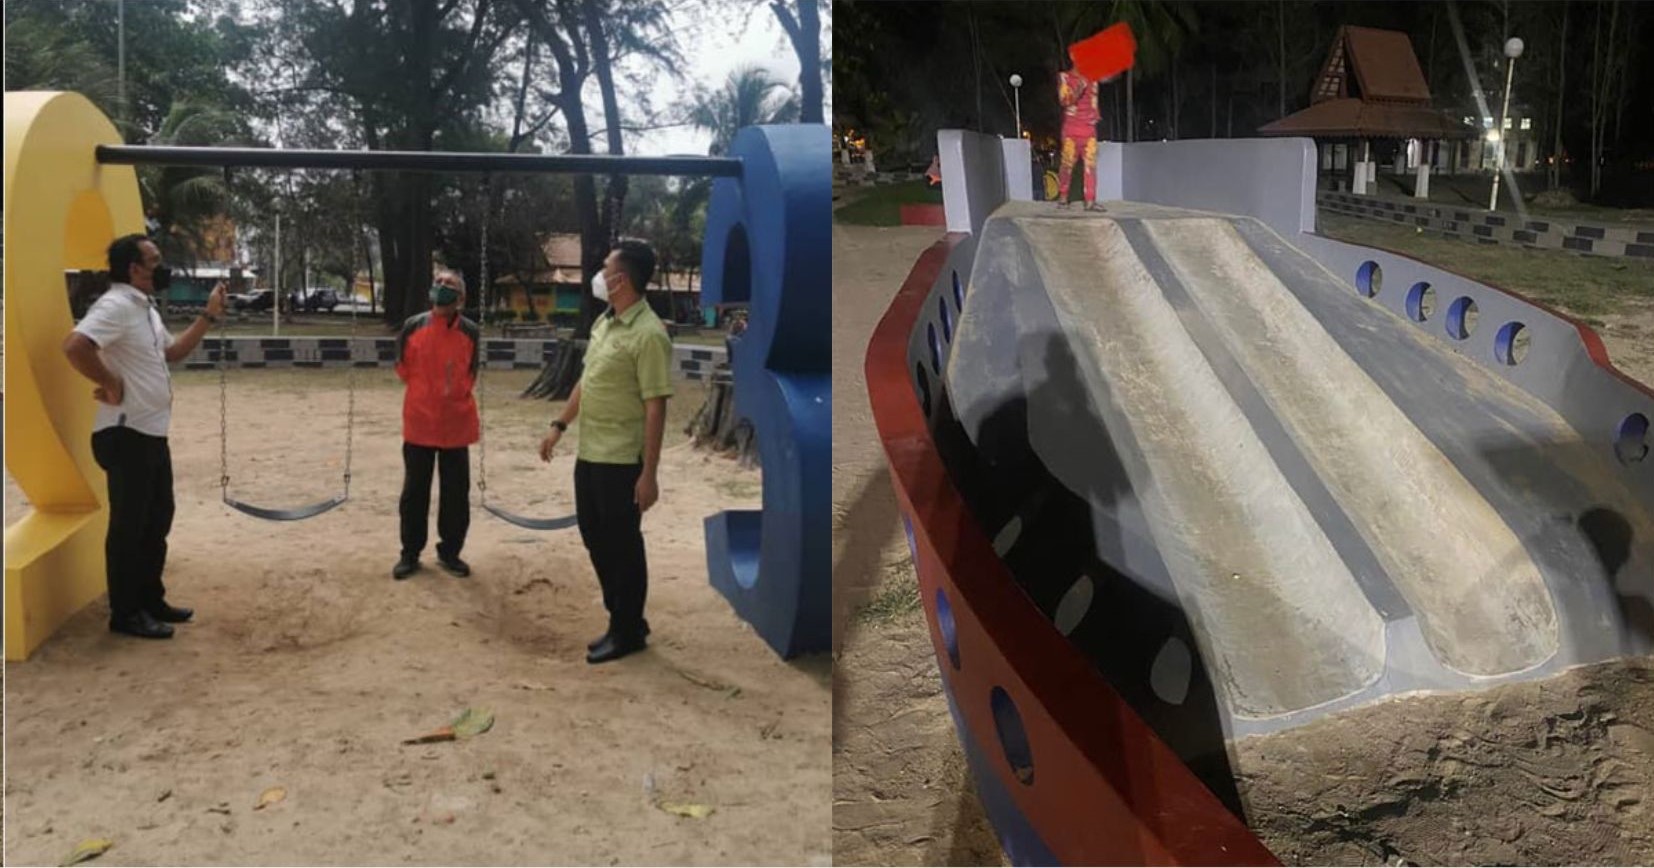 Playground Or PLKN Camp? Malaysians Confused Over Supposed Seaside Play Area